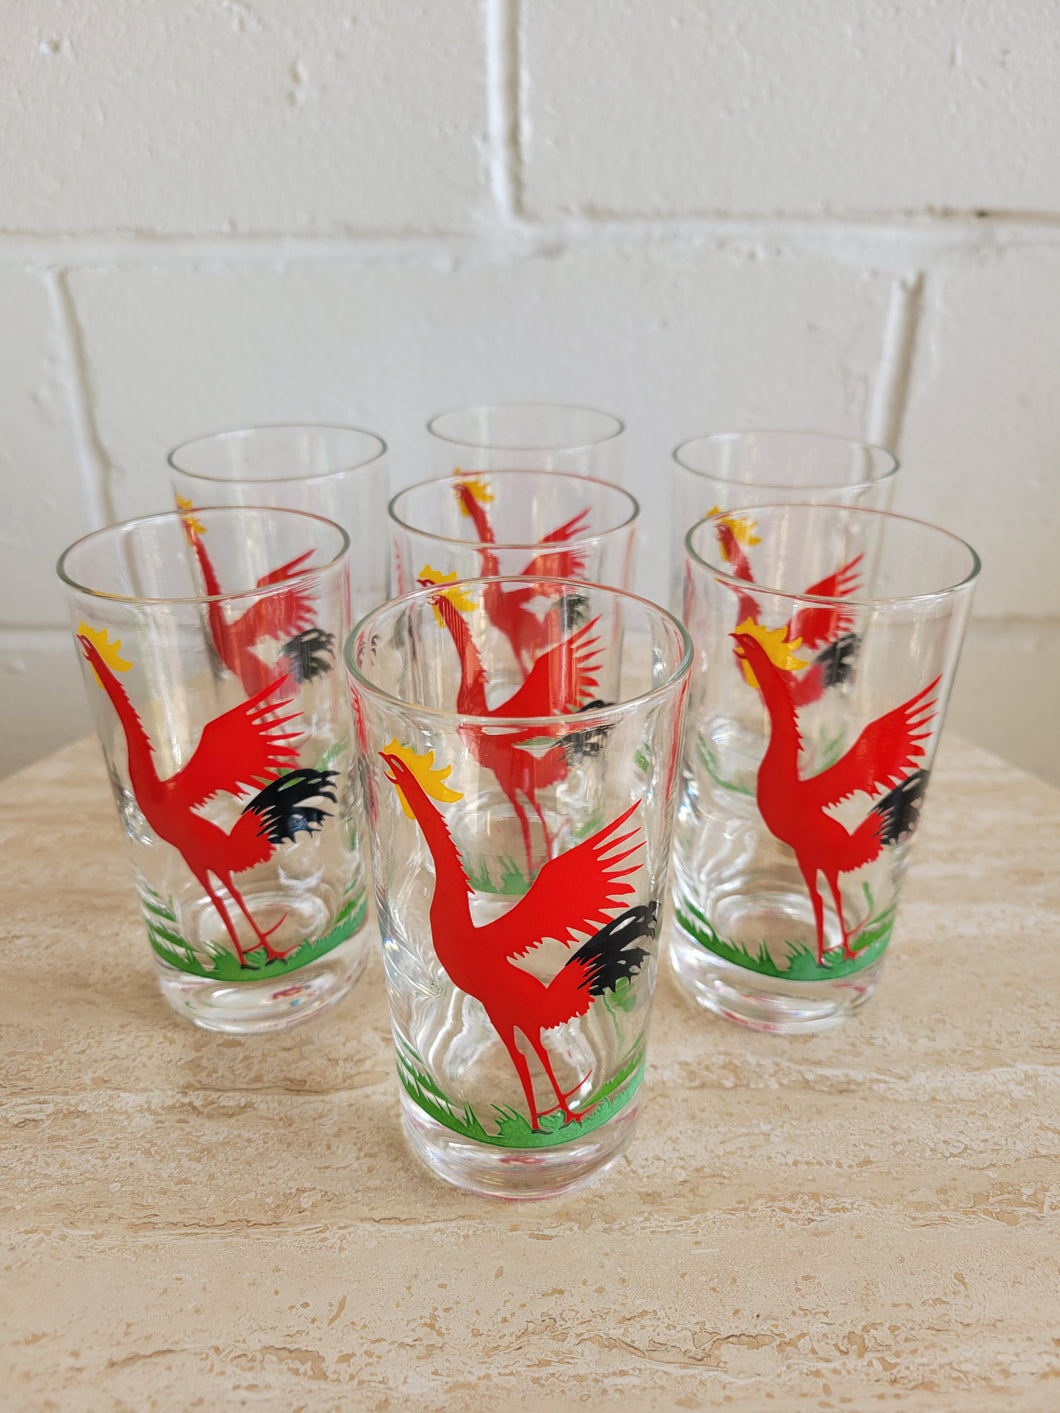 Mid Century Federal Red Rooster Drinking Glass Set - 7 count